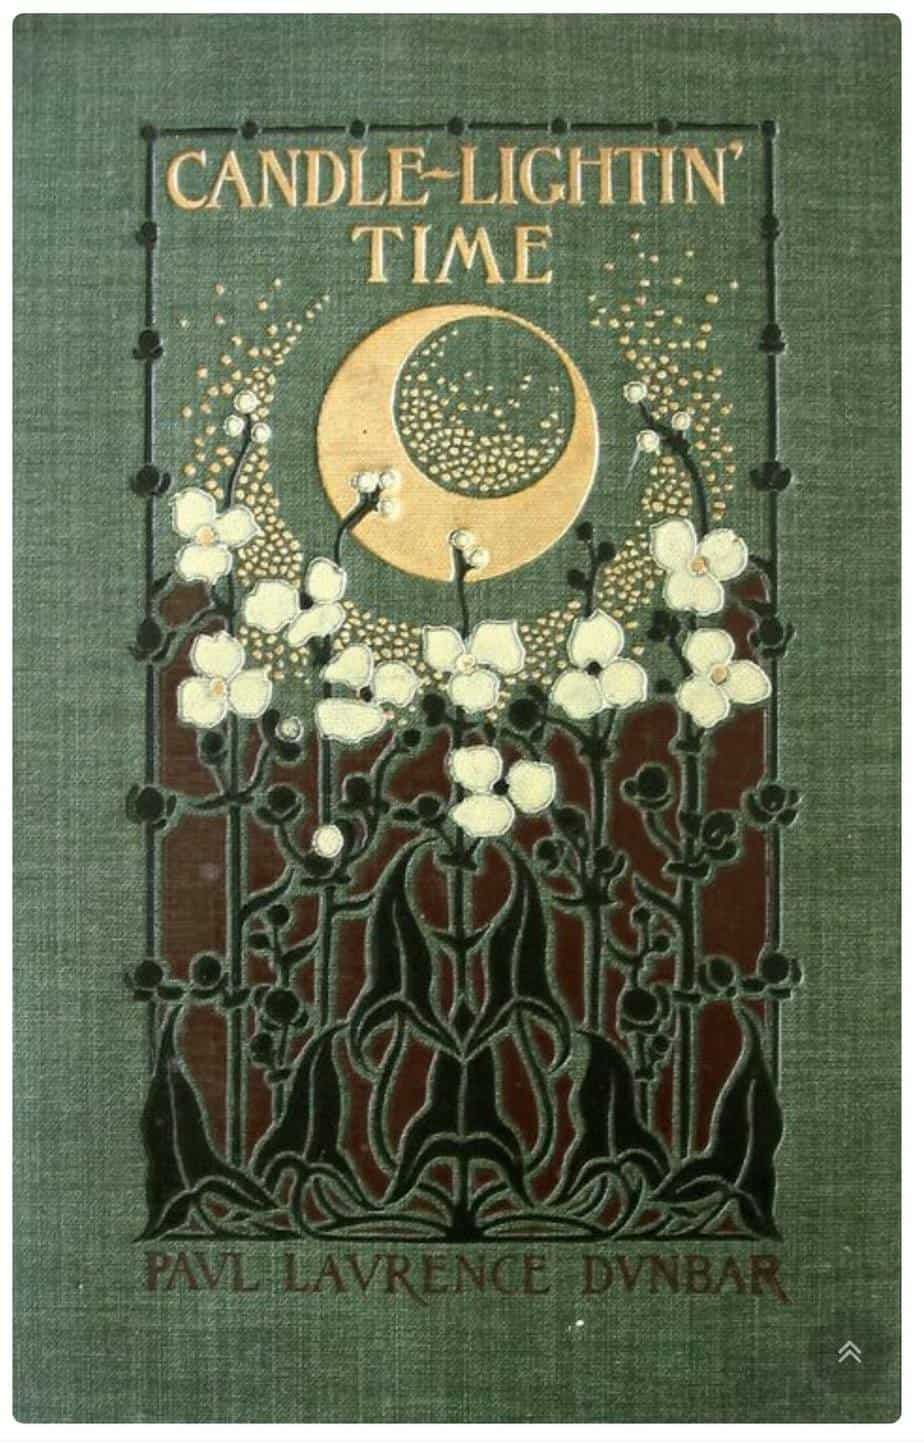 Candle-lightin' Time book cover